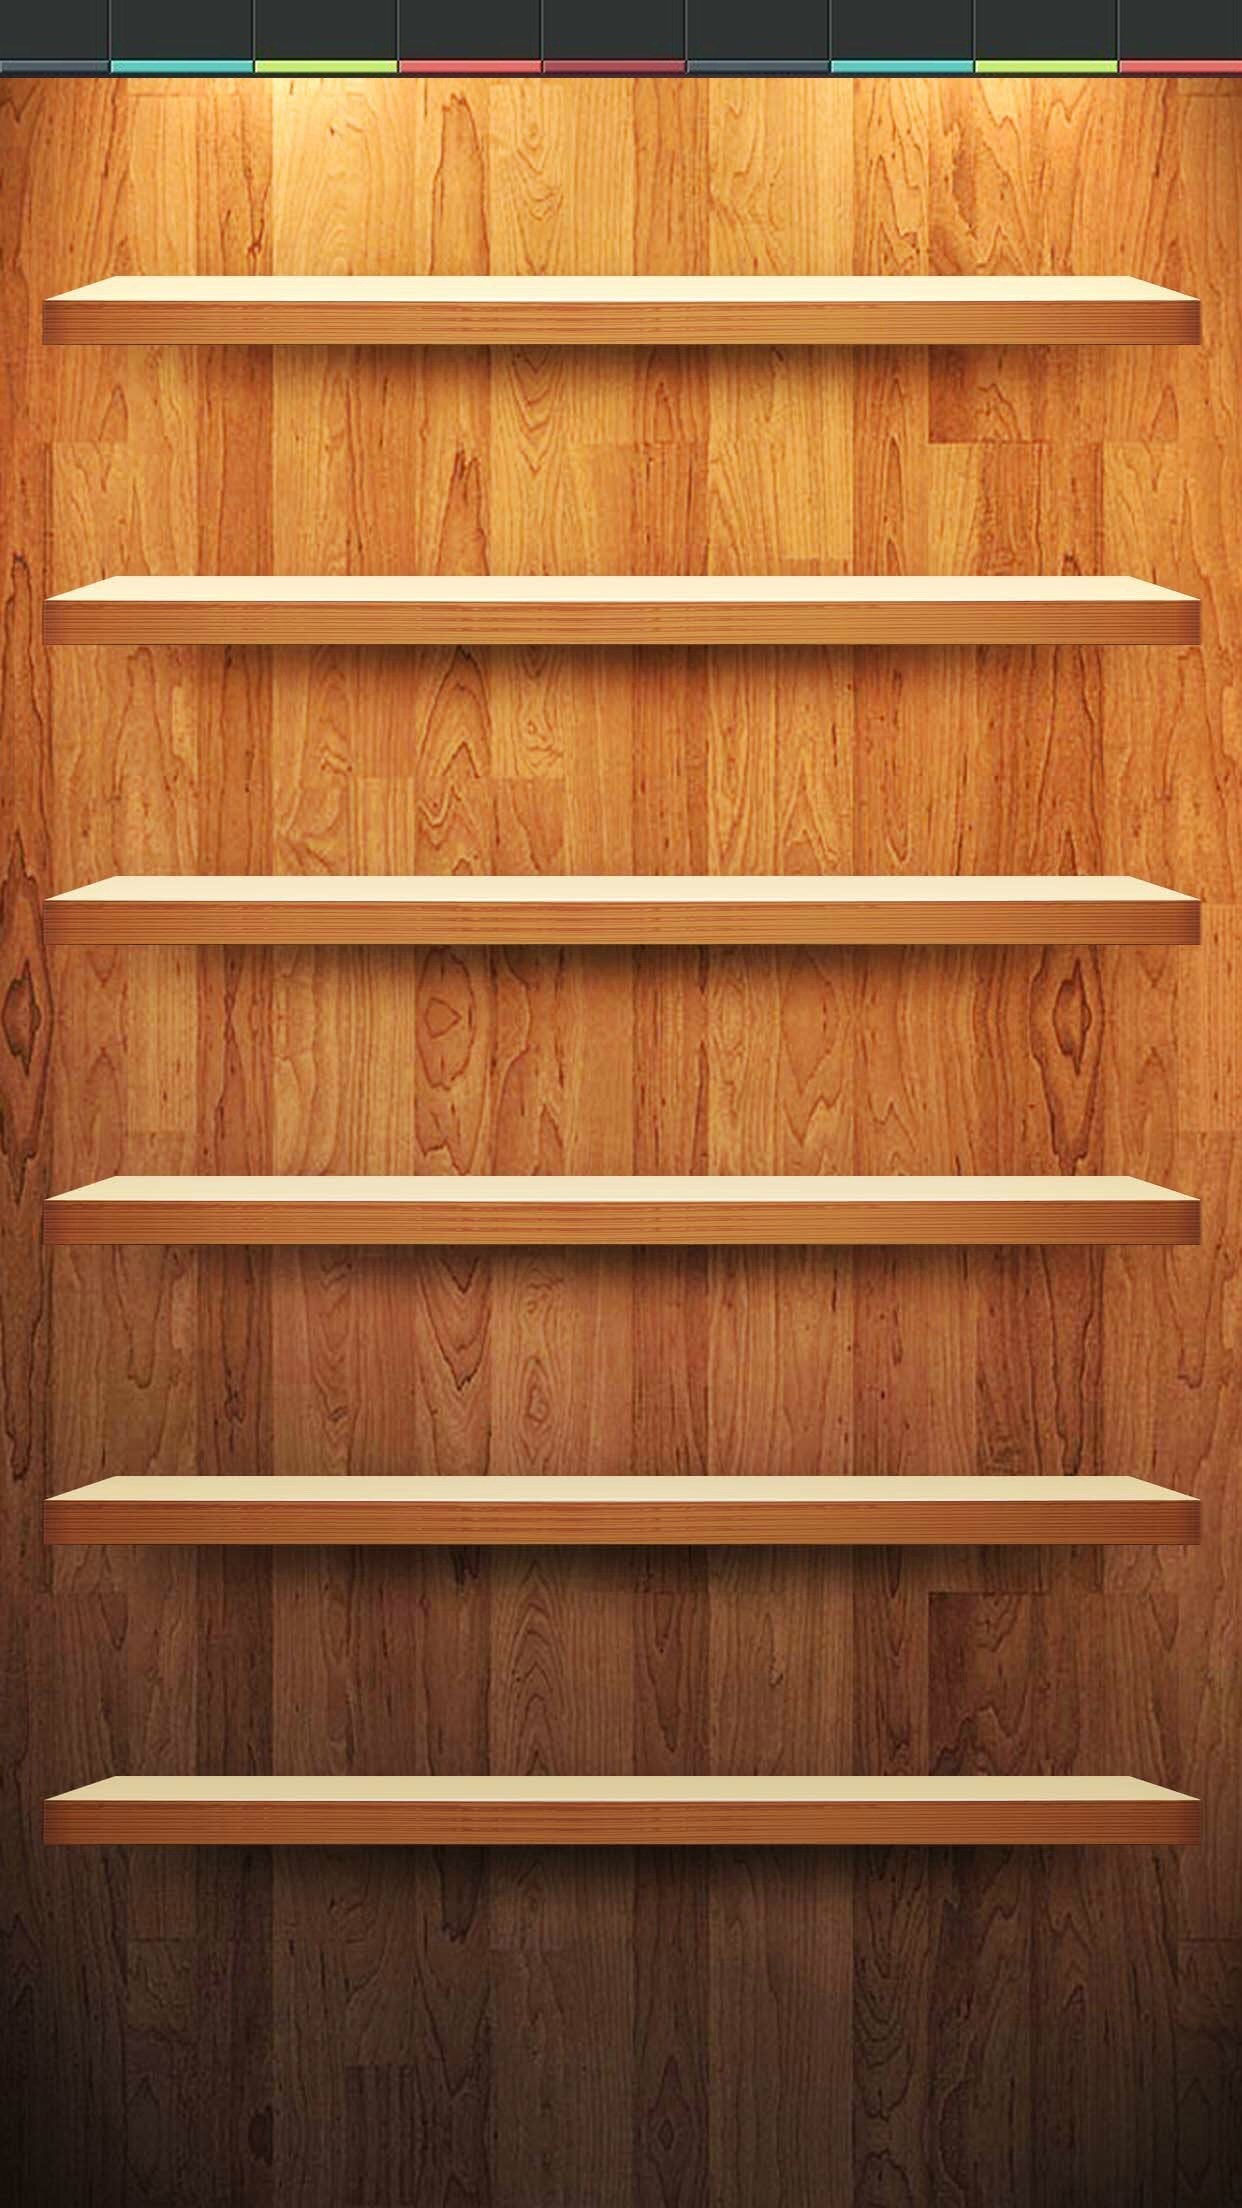 Wood App Shelf Wallpaper With Status Bar Background For IPhone 6 6s Plus